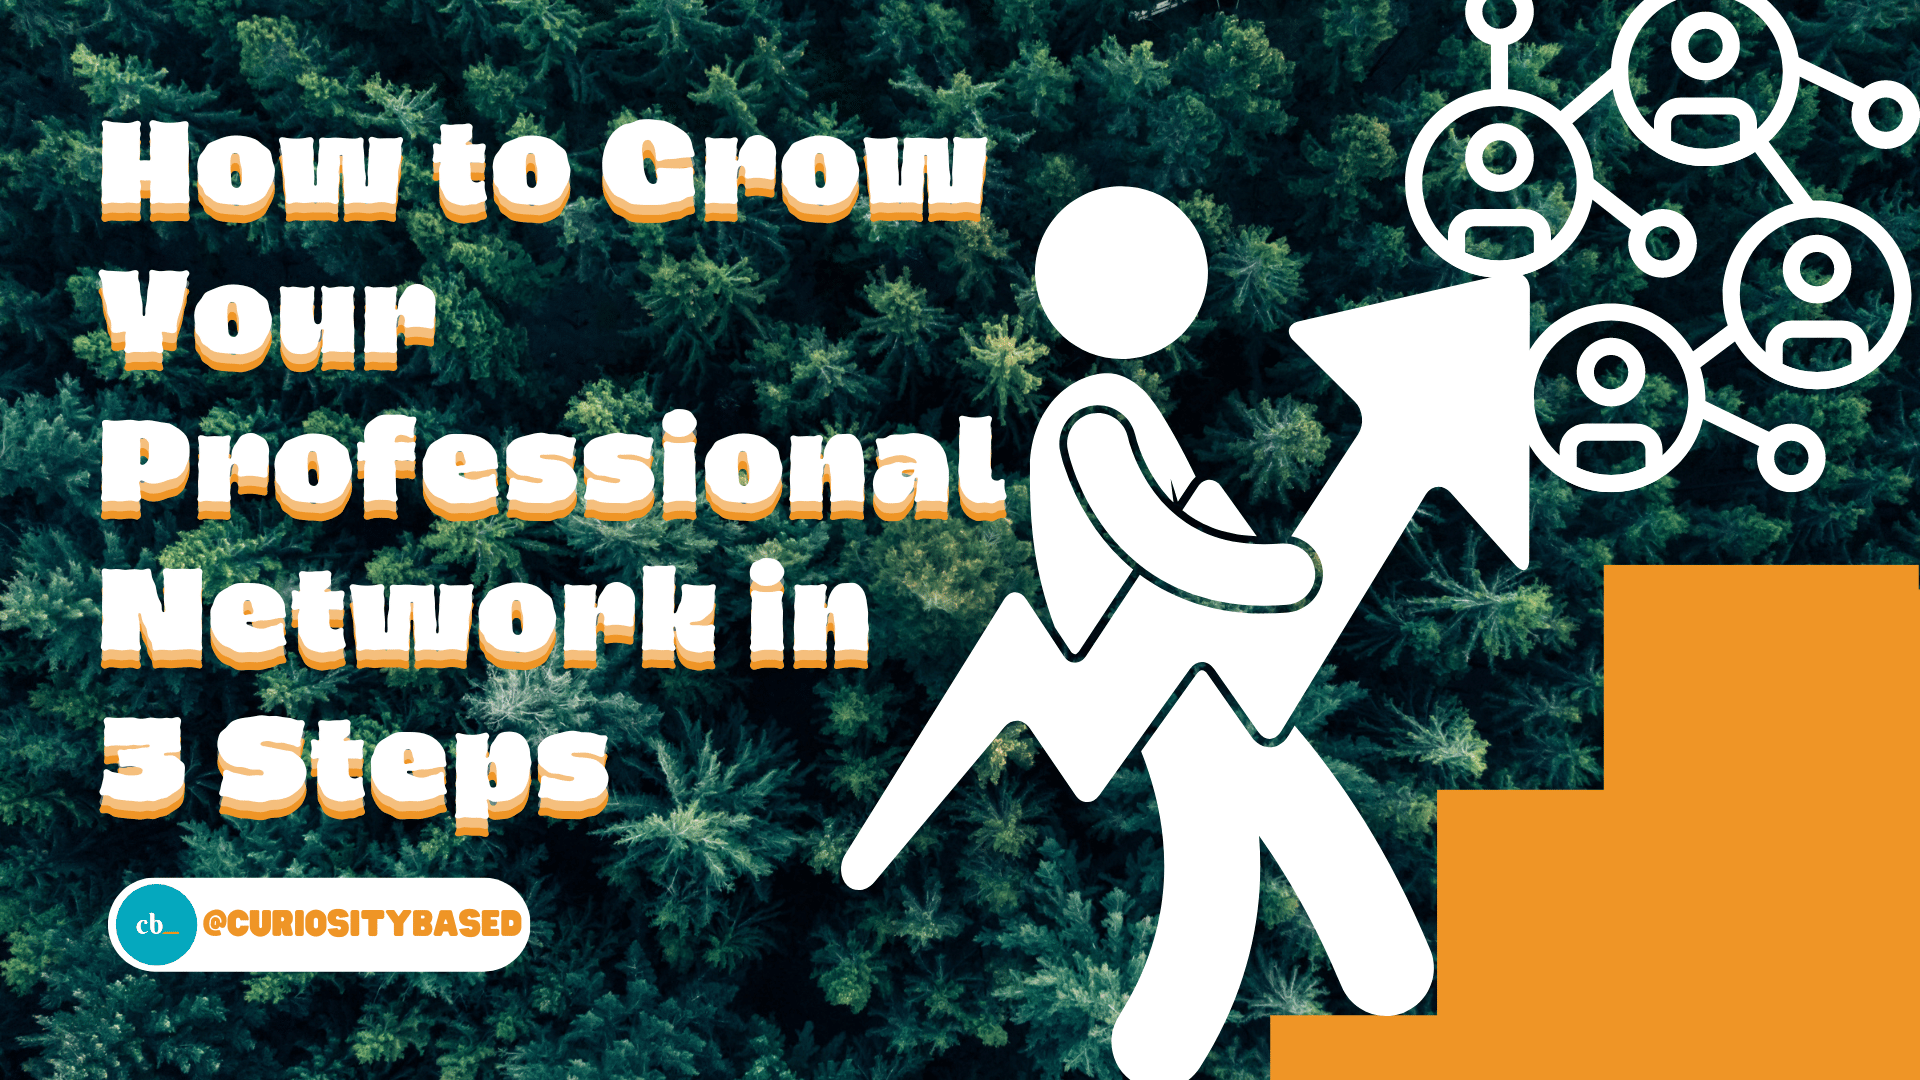 How to Grow Your Professional Network in 3 Steps